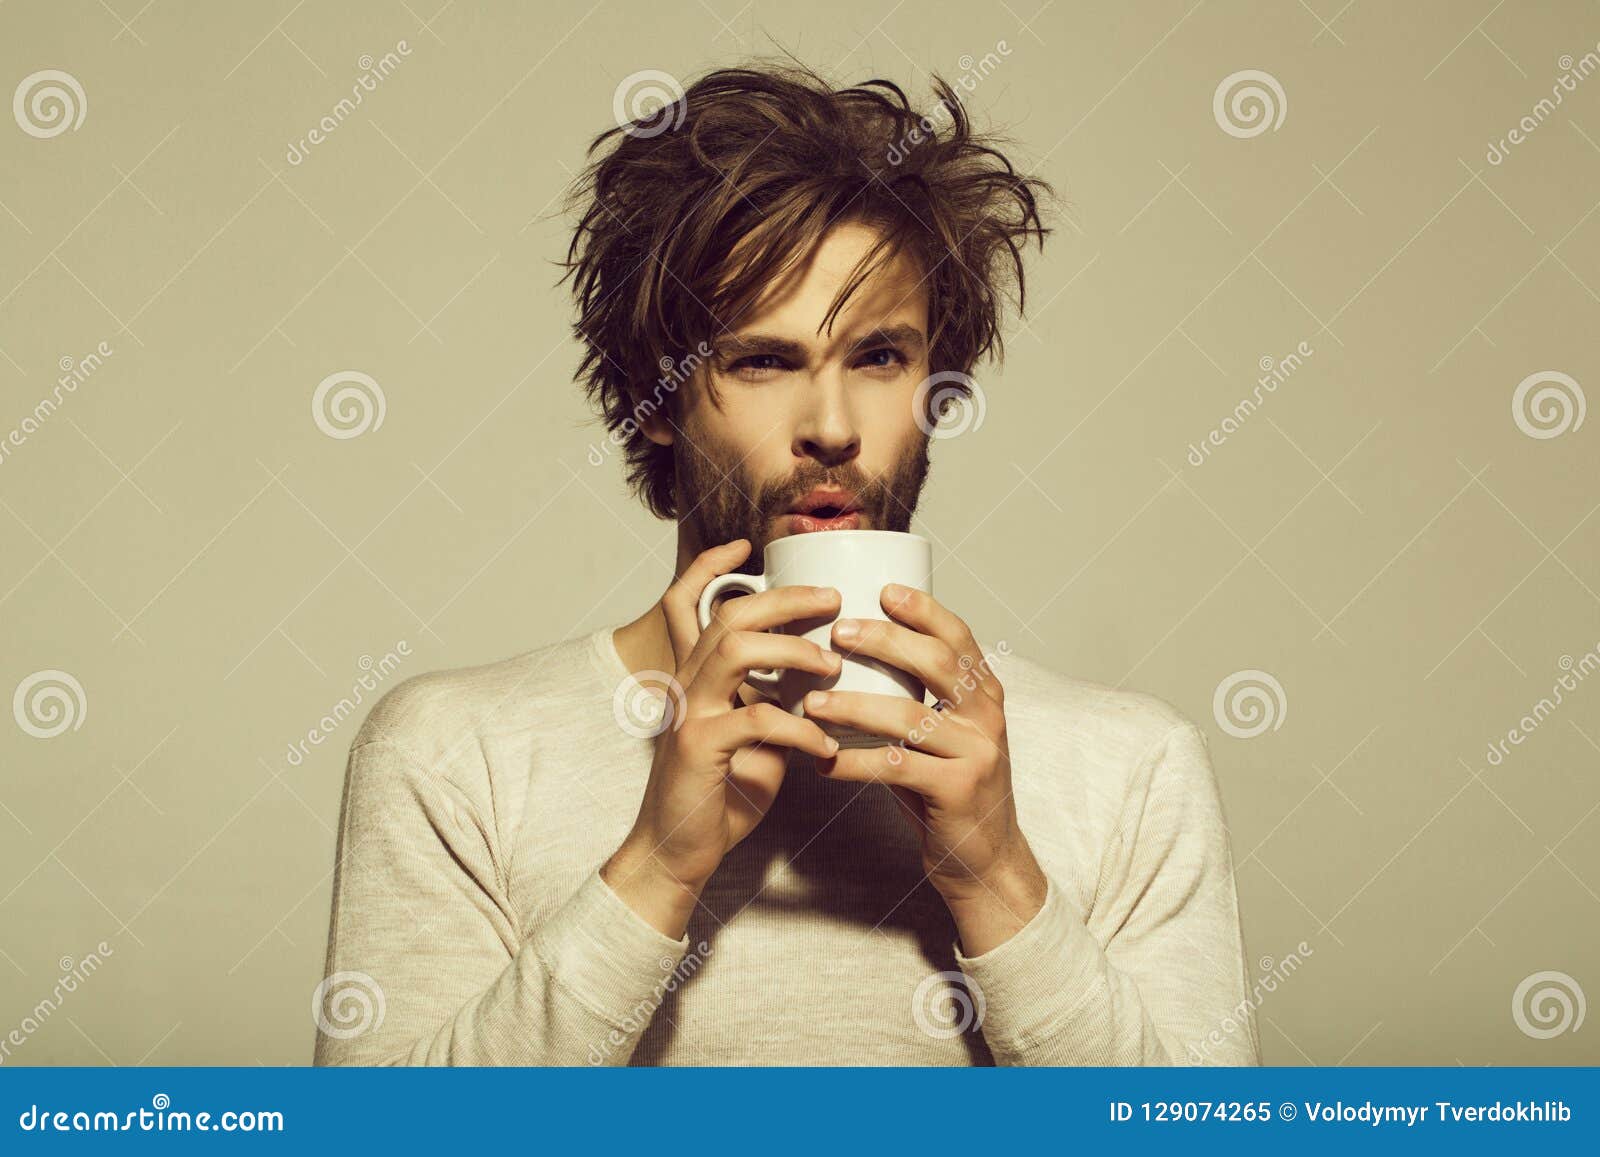 Tea or Coffee at Man Drink from Cup Stock Image - Image of grey ...